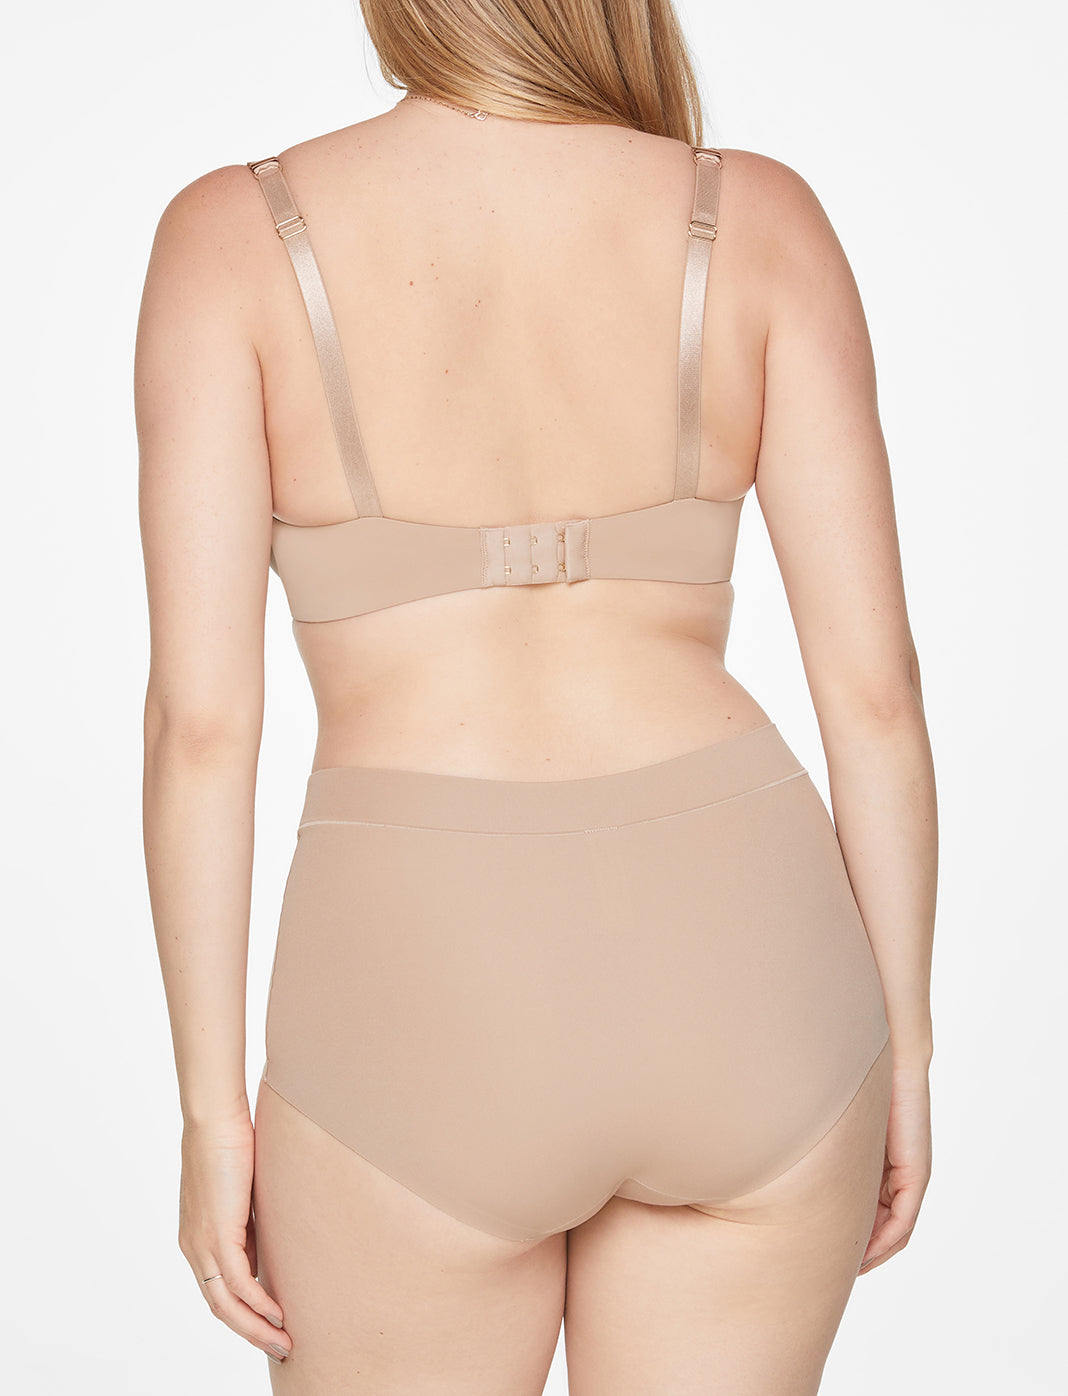 Safe to cut out the top “x” out of the XO Plunge bra? : r/torrid